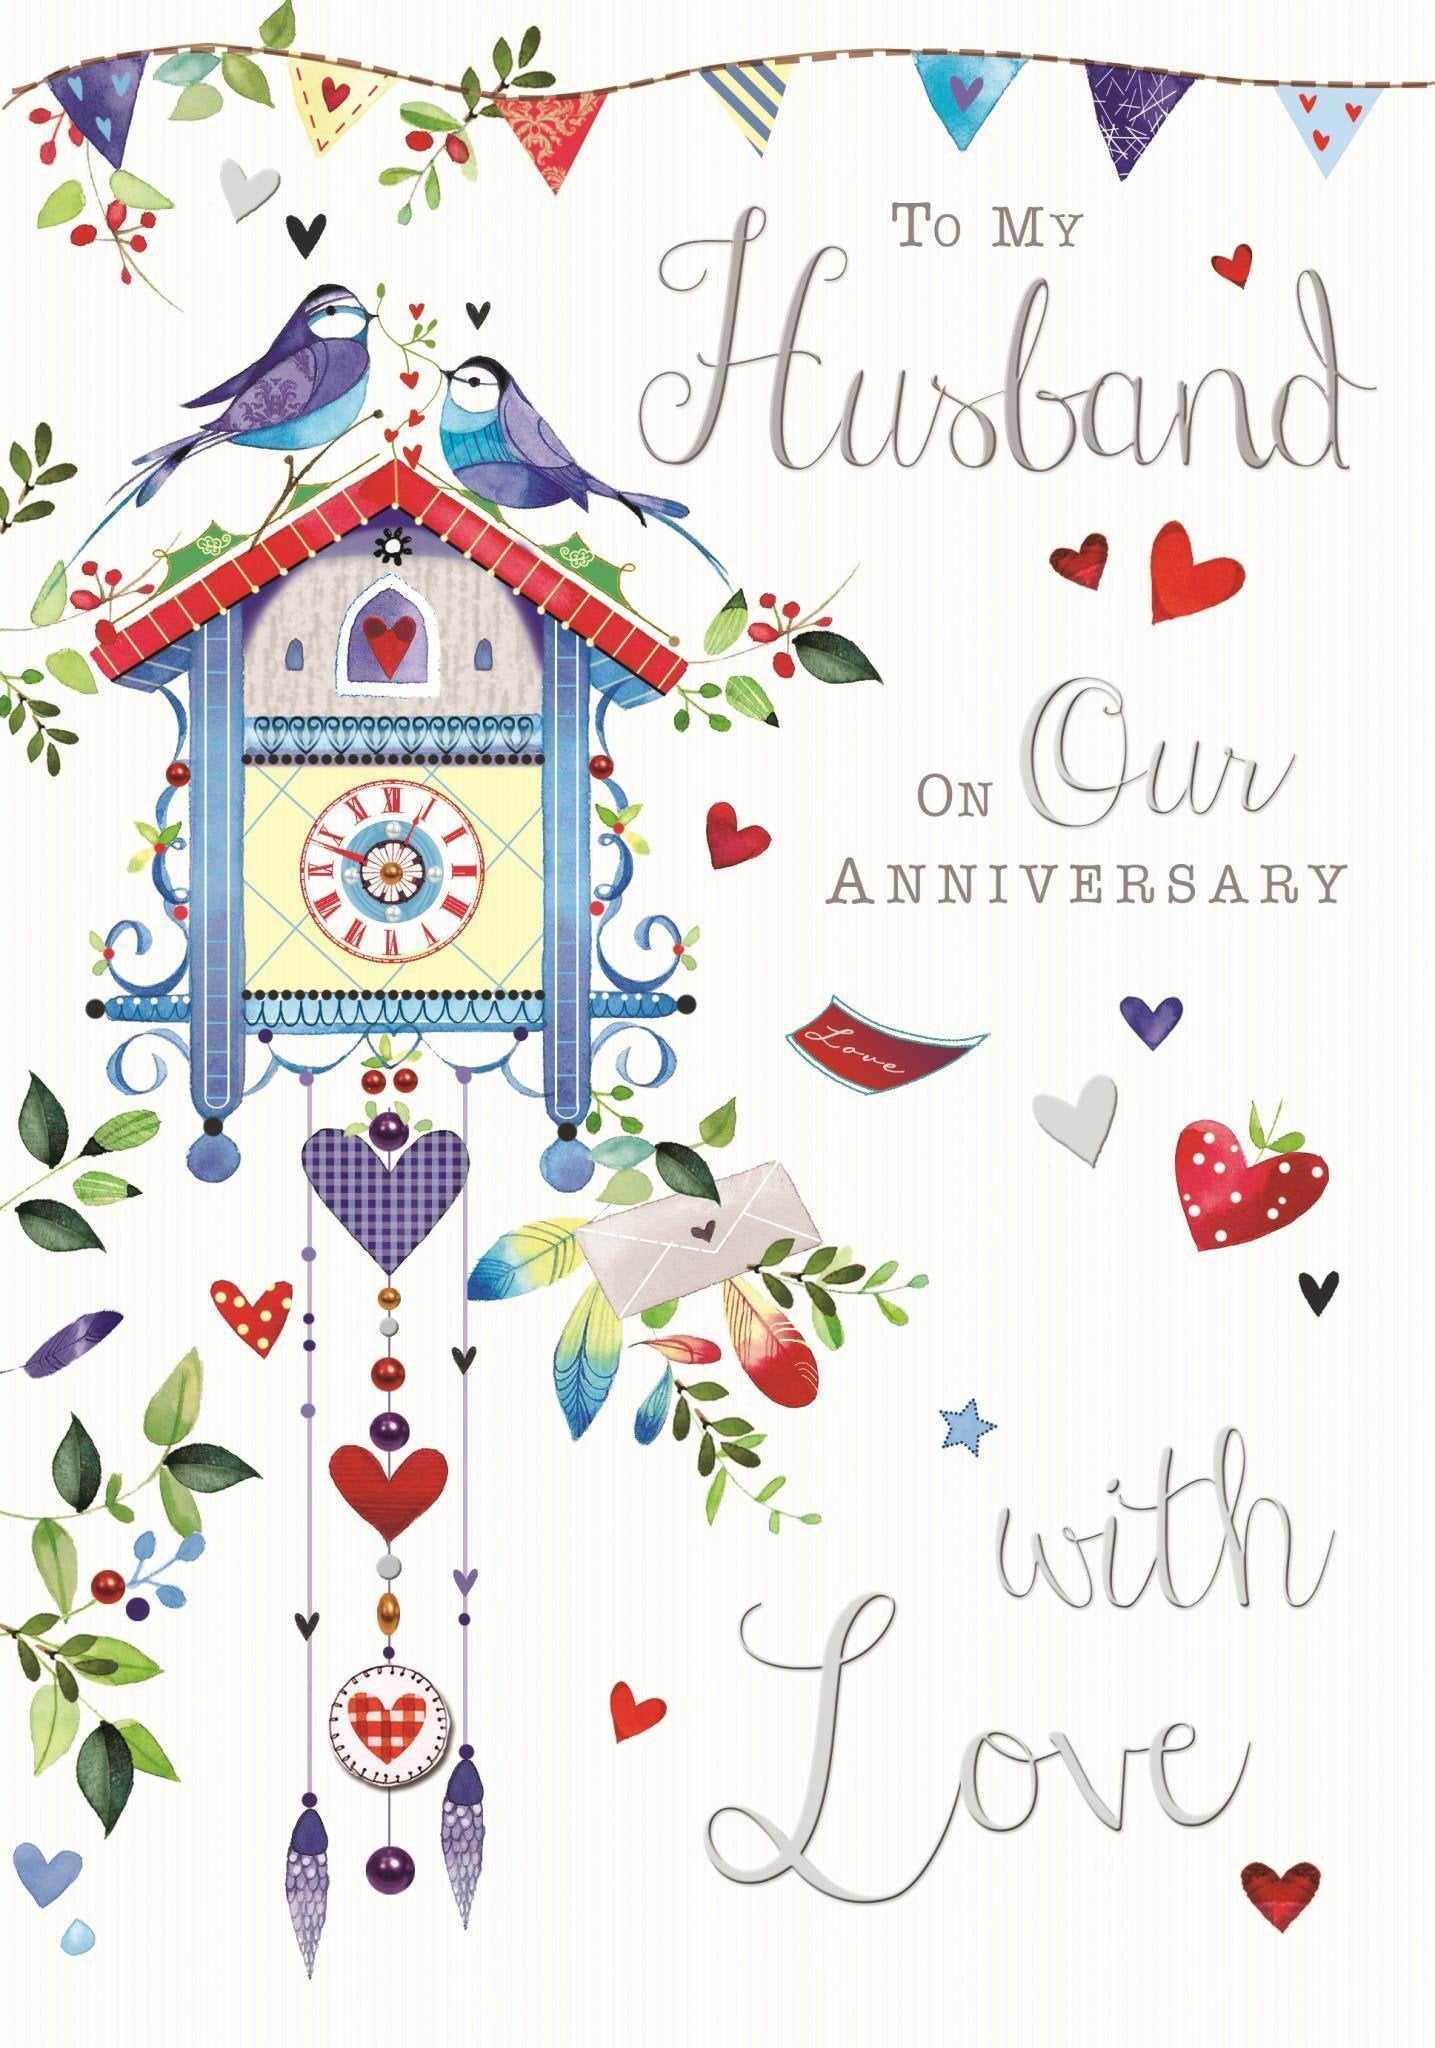 Front of Anniversary Husband Clock Greetings Card